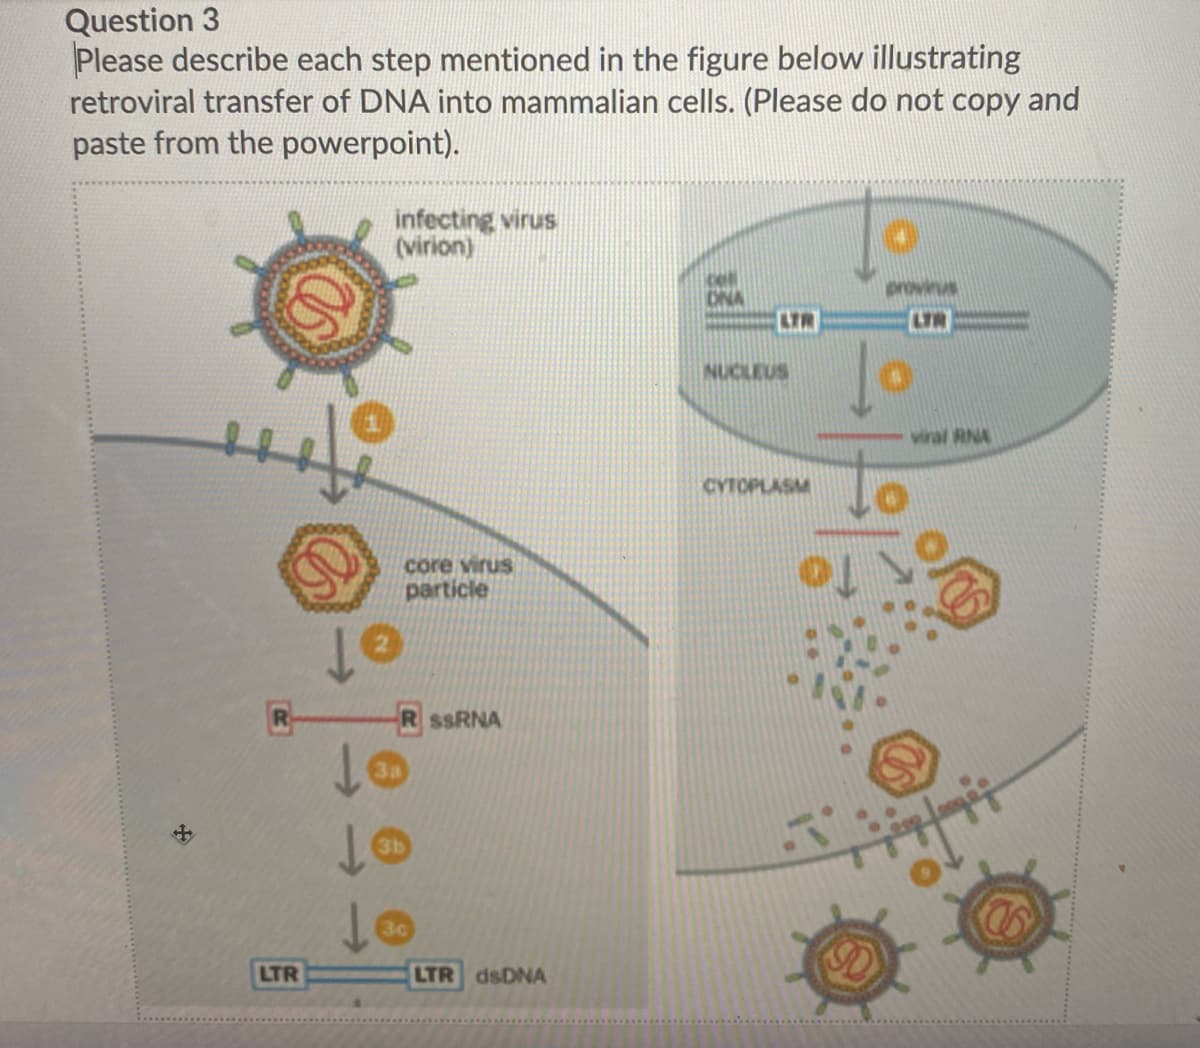 Question 3
Please describe each step mentioned in the figure below illustrating
retroviral transfer of DNA into mammalian cells. (Please do not copy and
paste from the powerpoint).
infecting virus
(virion)
cll
ONA
LTR
LTR
NUCLEUS
viral RNA
to
CYTOPLASM
core virus
particle
of
R SSRNA
3c
LTR
LTR dsDNA
